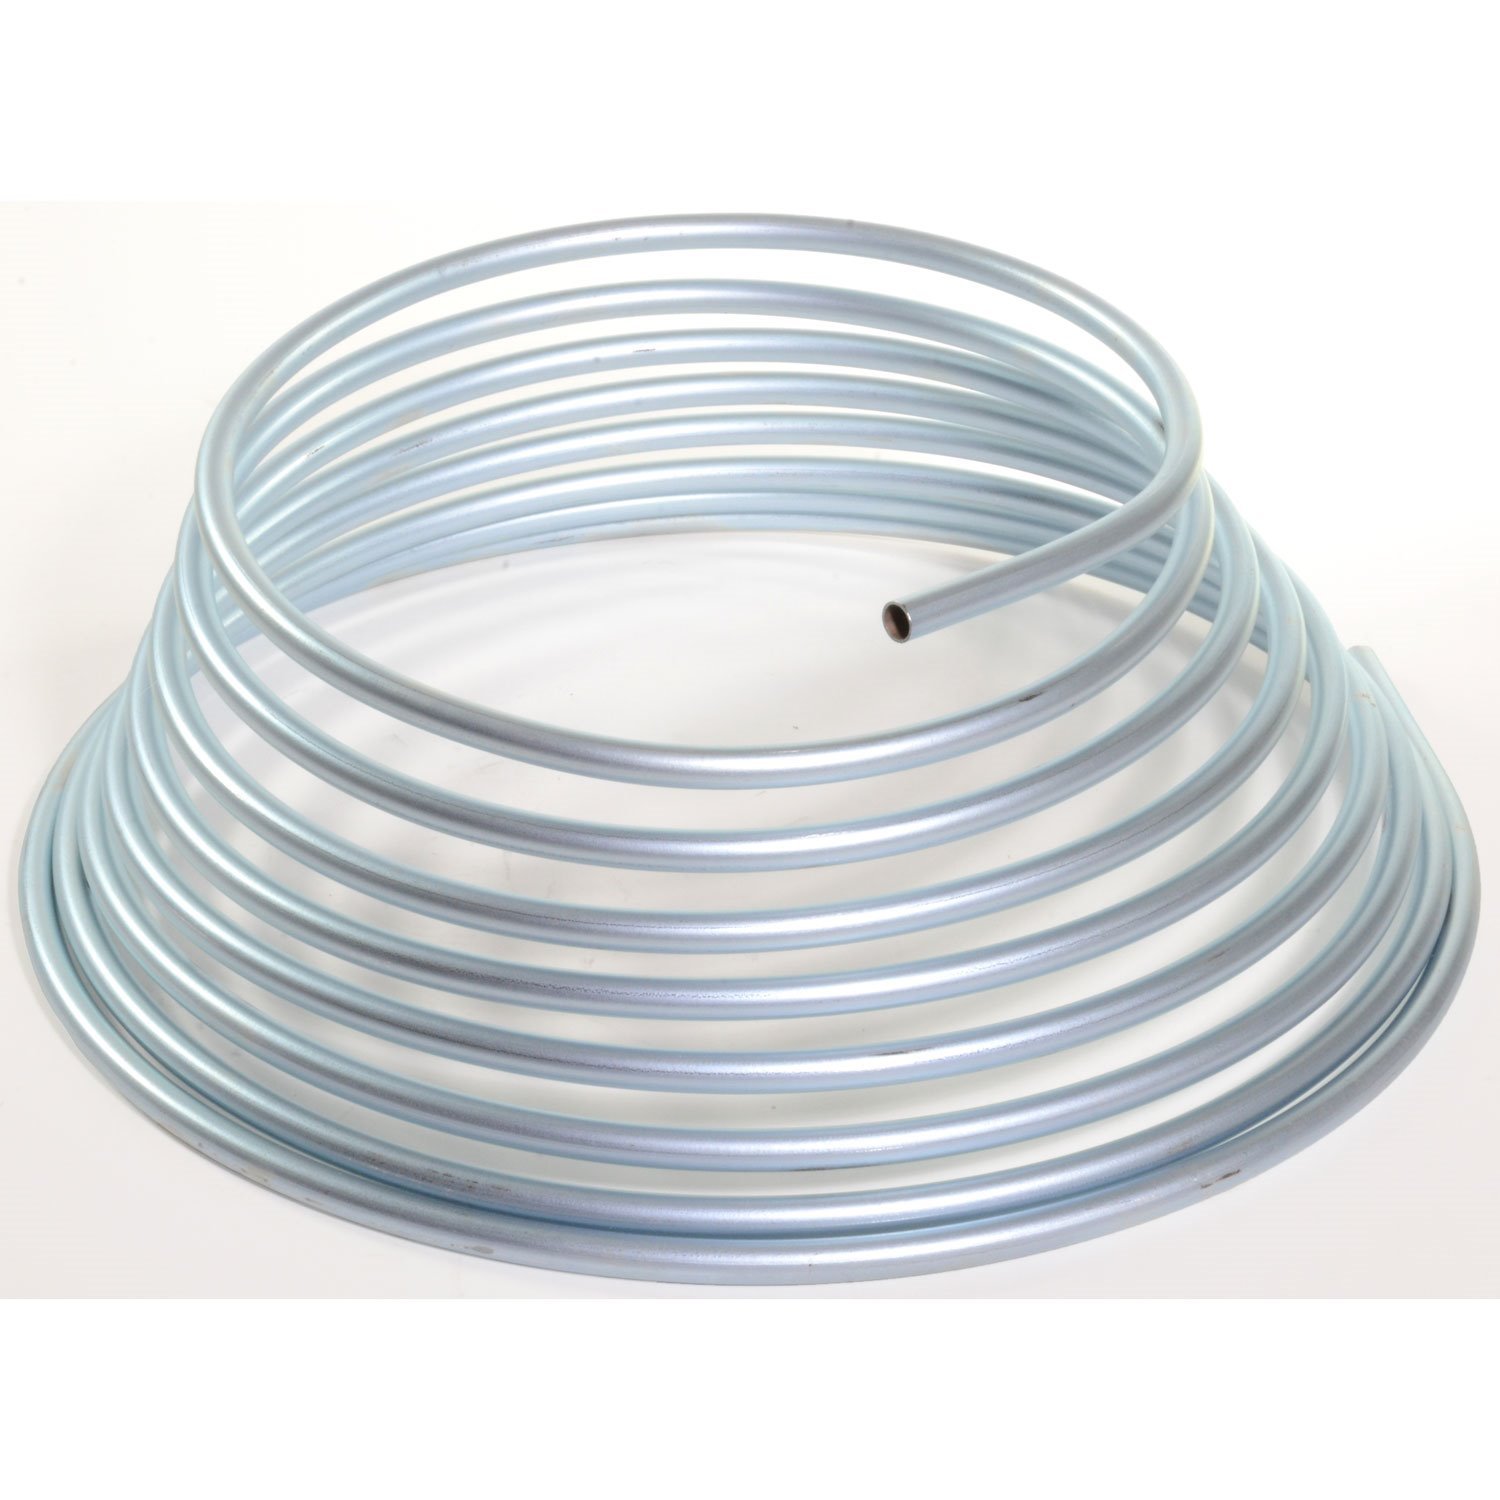 Zinc Fuel and Transmission Cooler Tubing 3/8 in. Diameter x 25 ft.